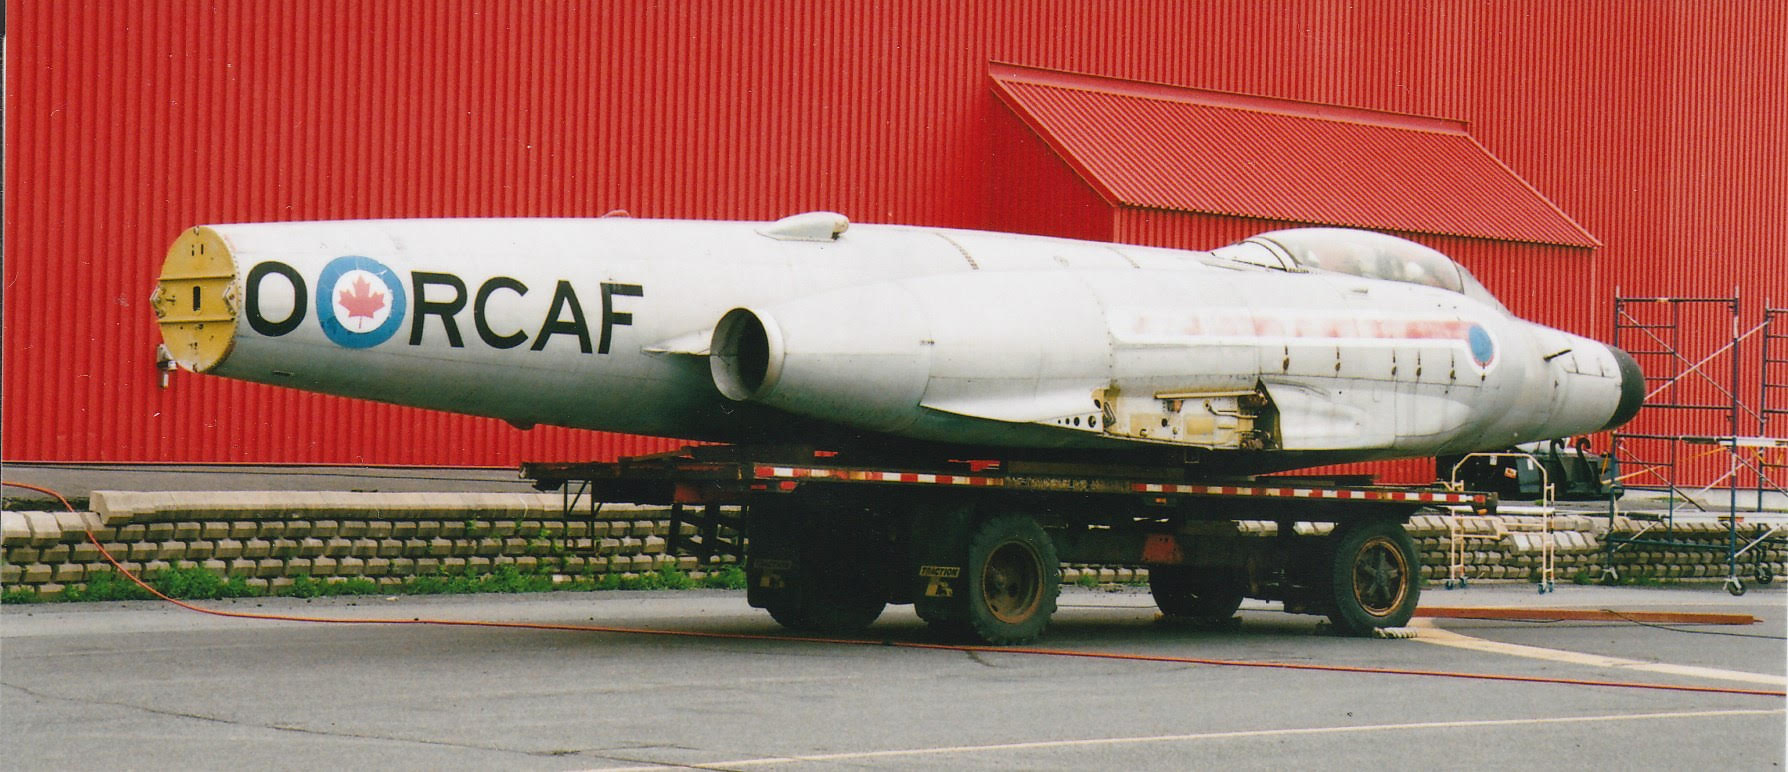 Avro Canada CF-100 Mk 5, flown as a test bed by P&W, now under restoration by the QAM at St. Hubert, May 25, 2019. This aircraft, formerly RCAF 100760, has a unique place in history as a result of its long service with Pratt and Whitney where it flew from 1968 to 1982 as a test bed for the JT15D turbofan engine, installed on the underside of the fuselage.